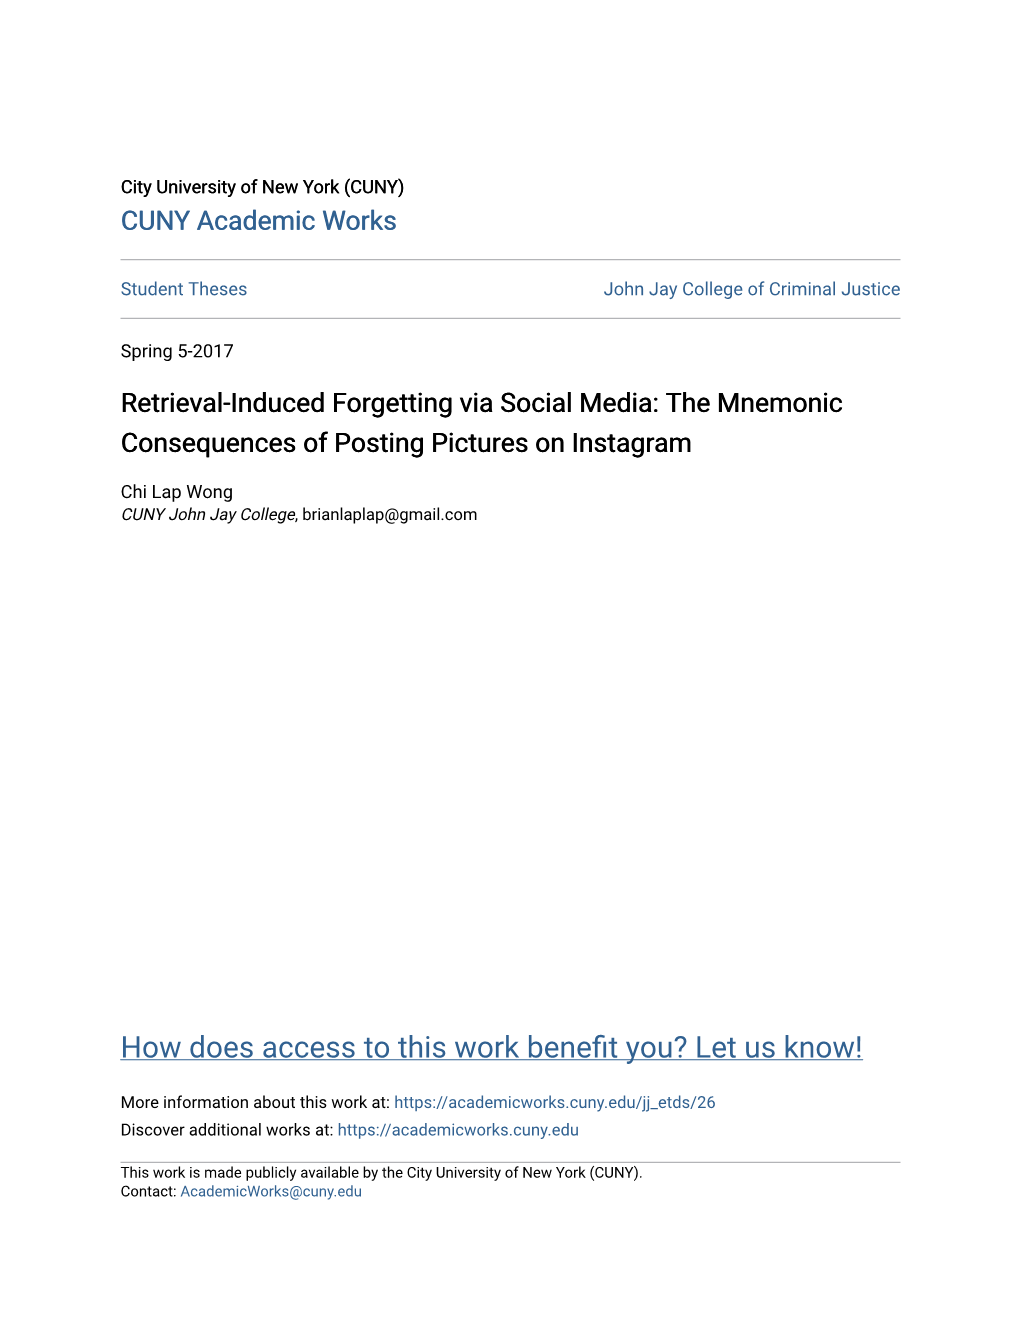 Retrieval-Induced Forgetting Via Social Media: the Mnemonic Consequences of Posting Pictures on Instagram